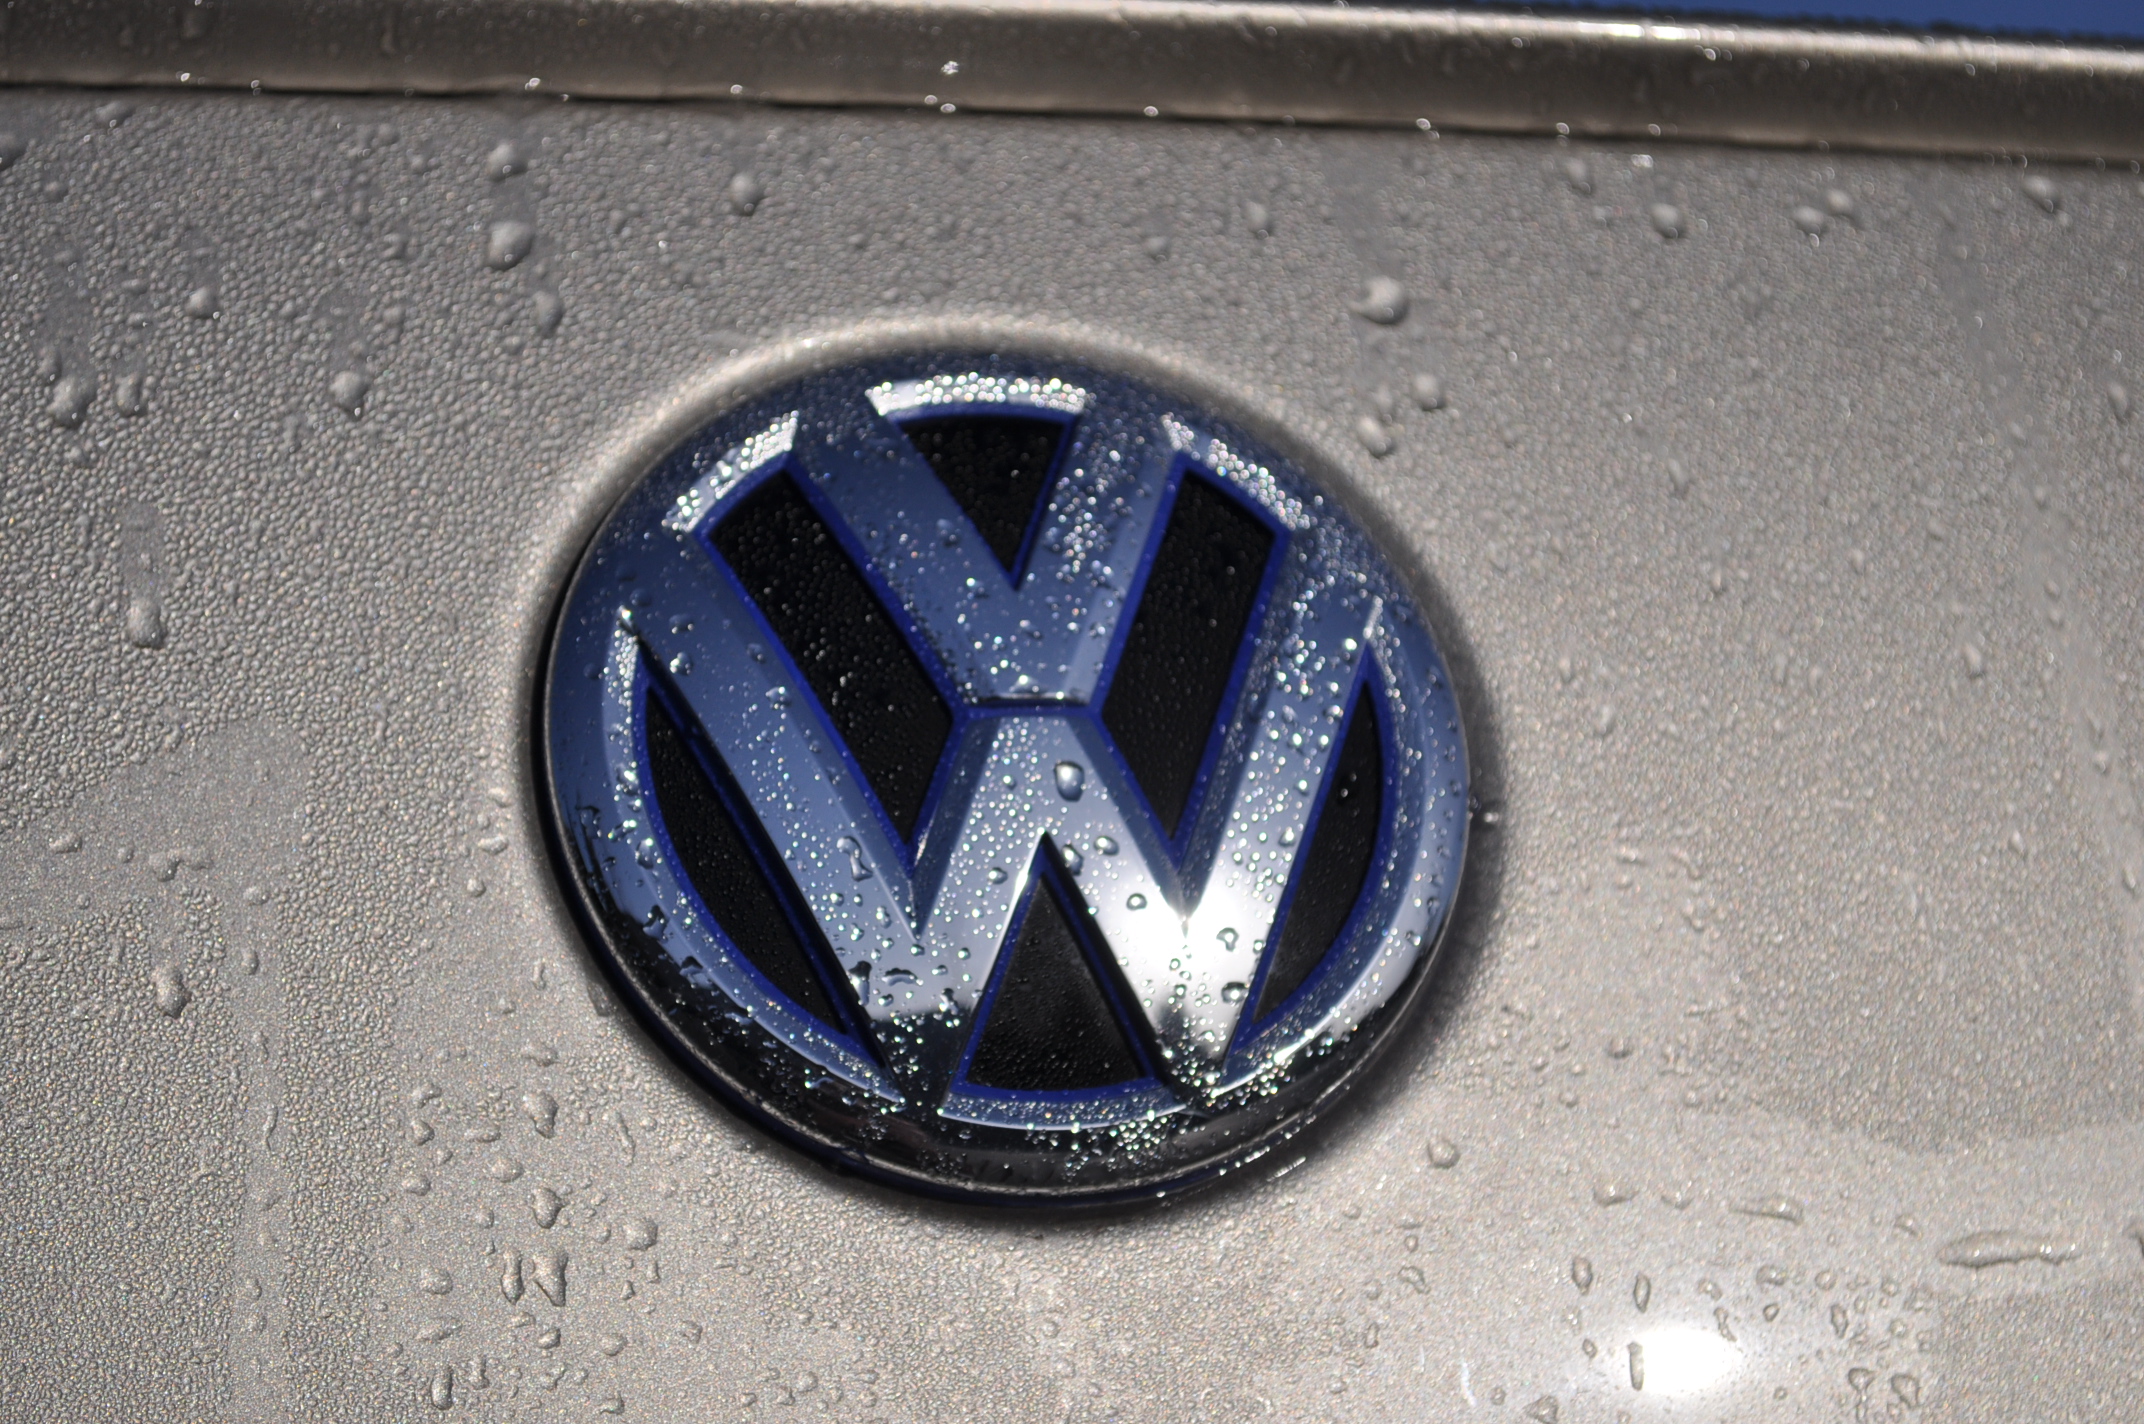 Forget Freon: VW Will Use CO2 As Air-Conditioning Refrigerant